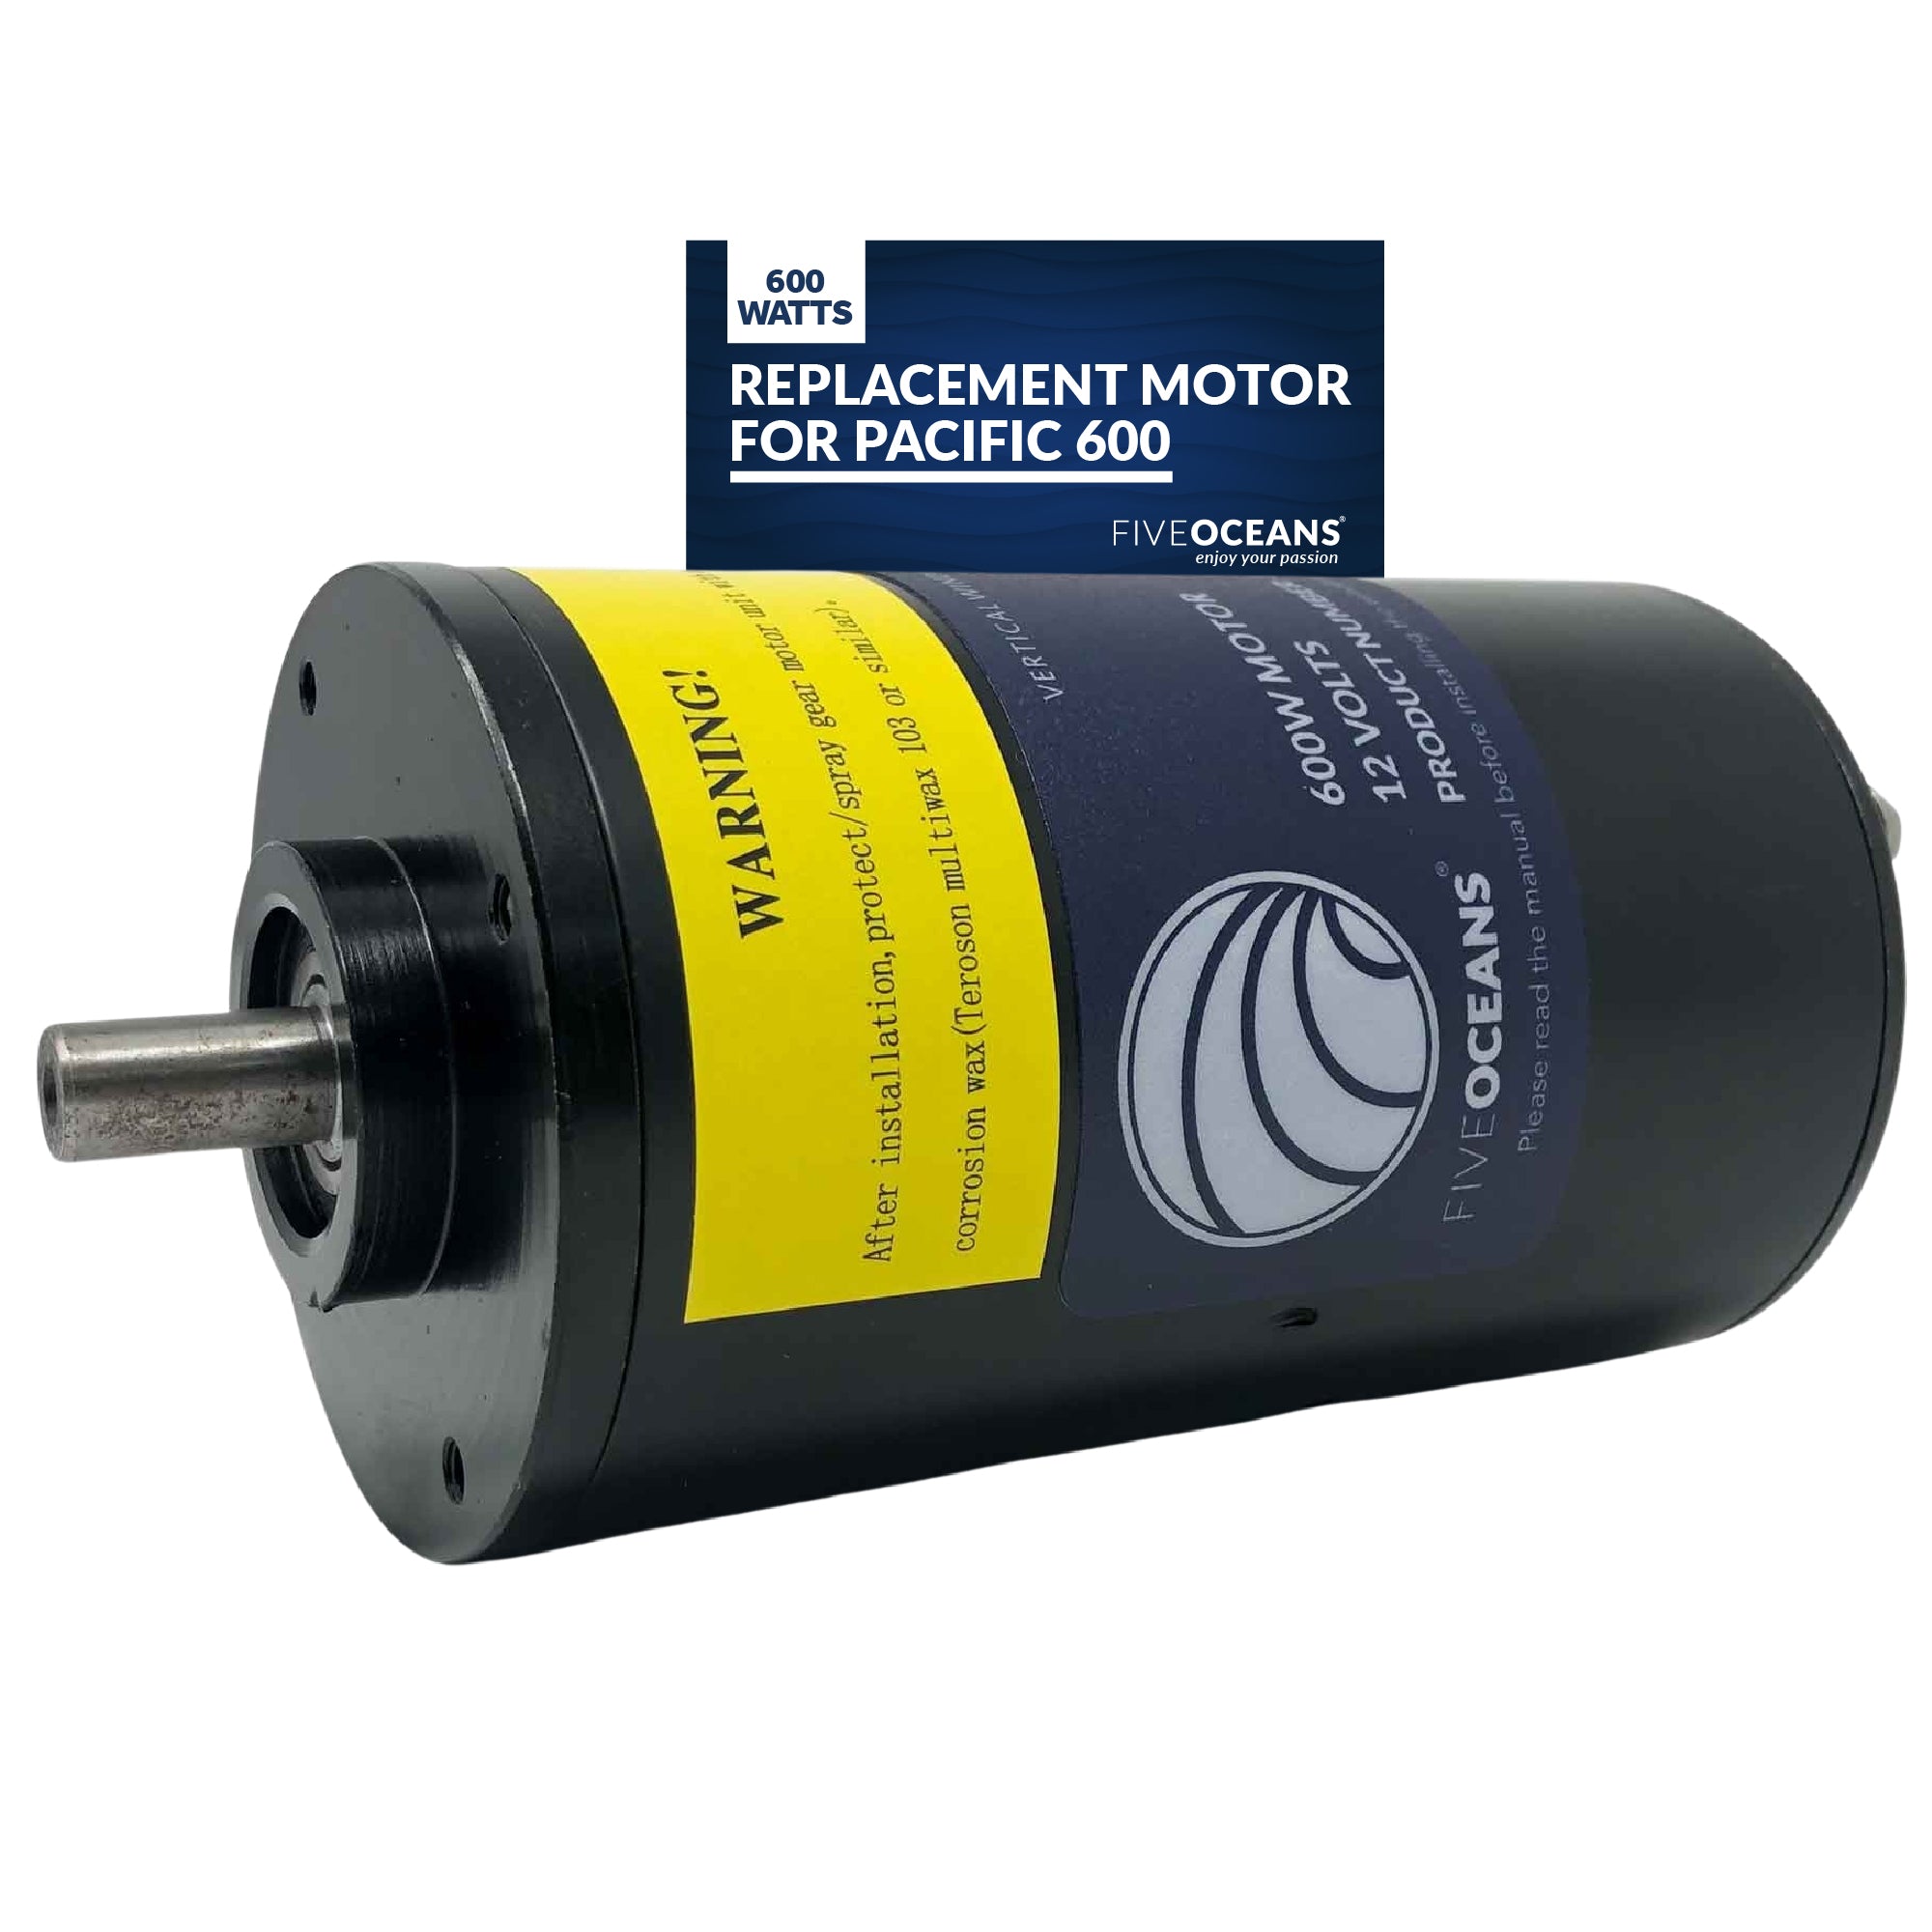 Replacement Motor for Pacific 600 - FO4260